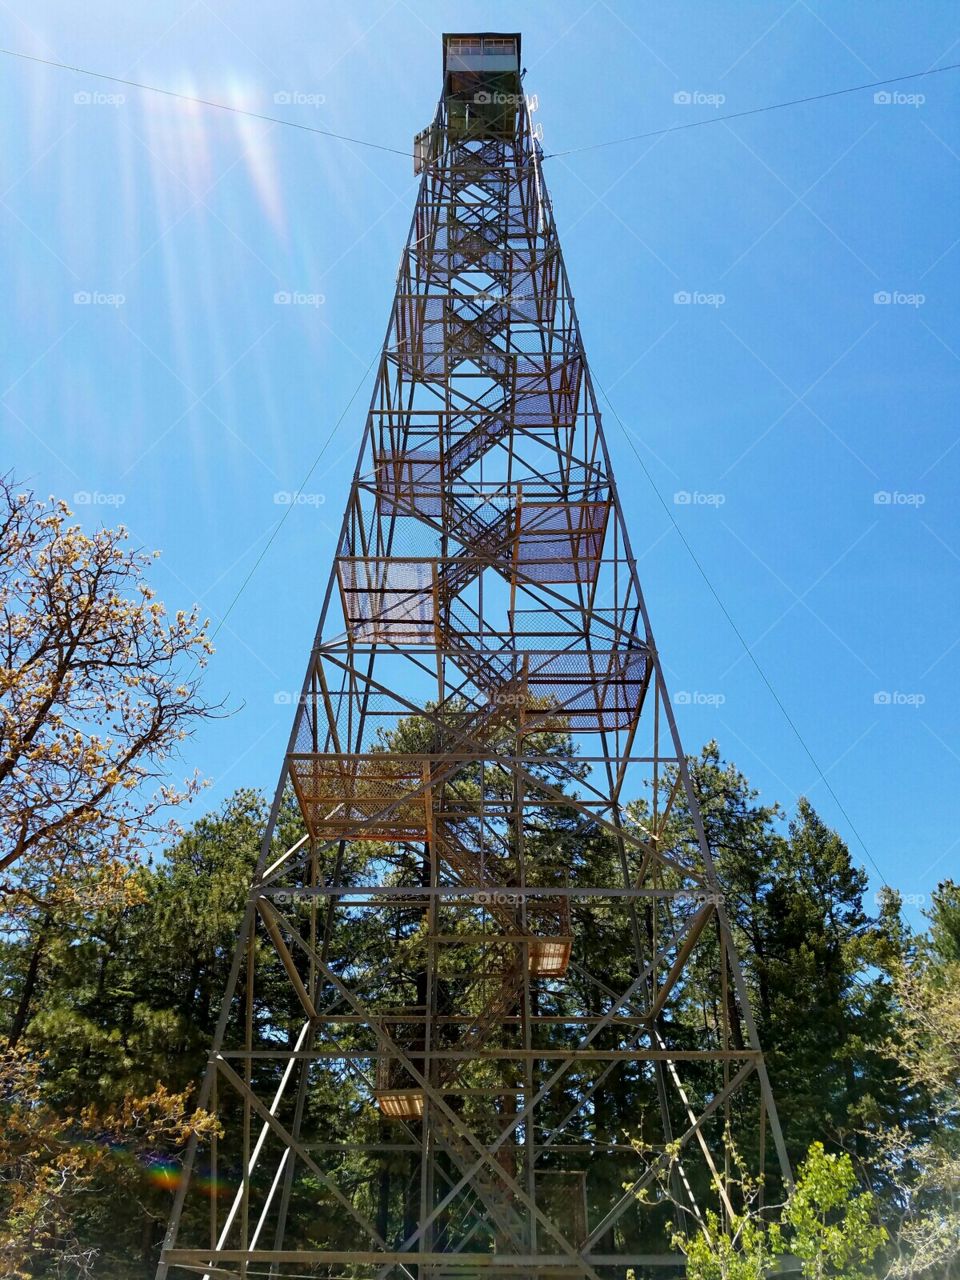 Fire Lookout Tower on the Mogollon Rim in Arizona.